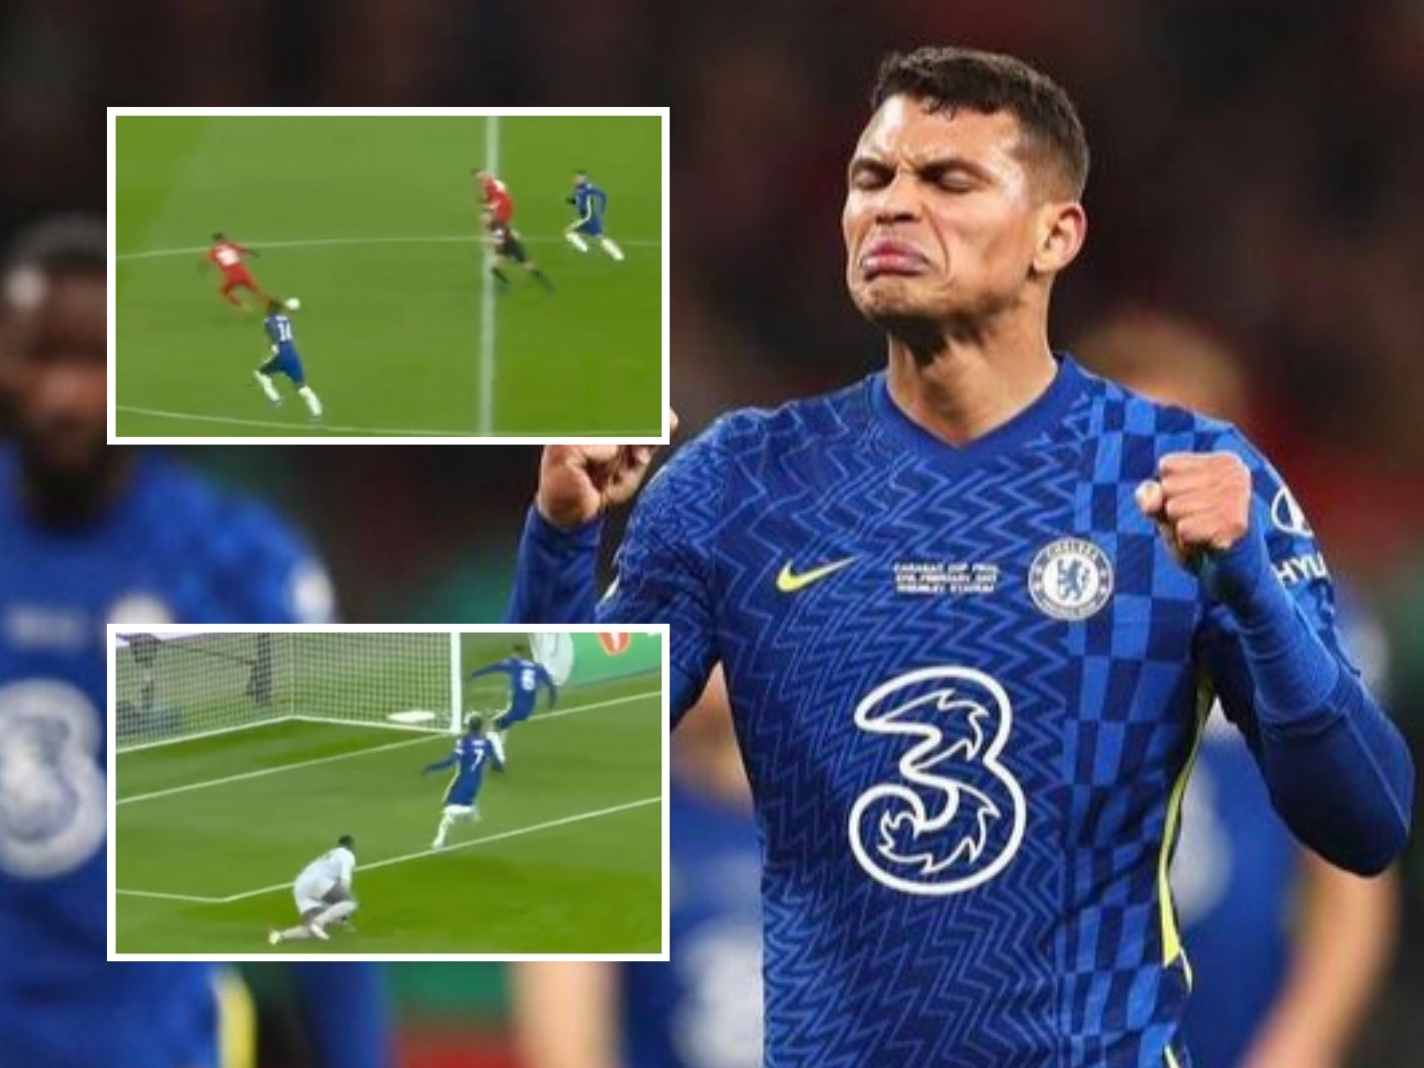 Moment Thiago Silva outpaces 3 Chelsea players to stop Liverpool counterattack